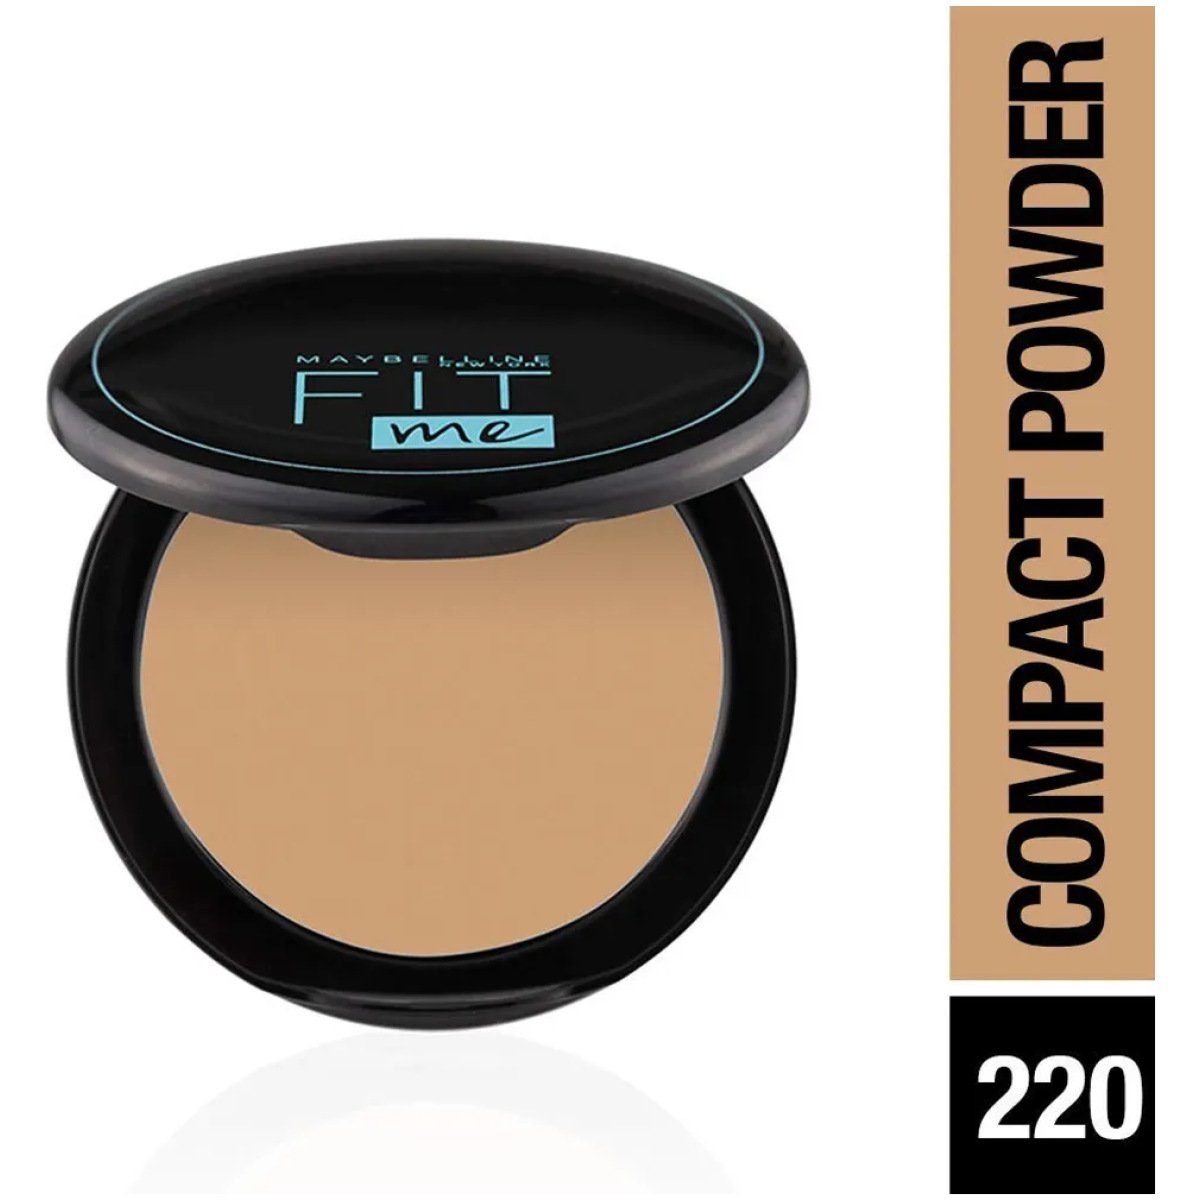 Maybelline New York Fit Me 12Hr Oil Control Compact, 220 Natural Beige